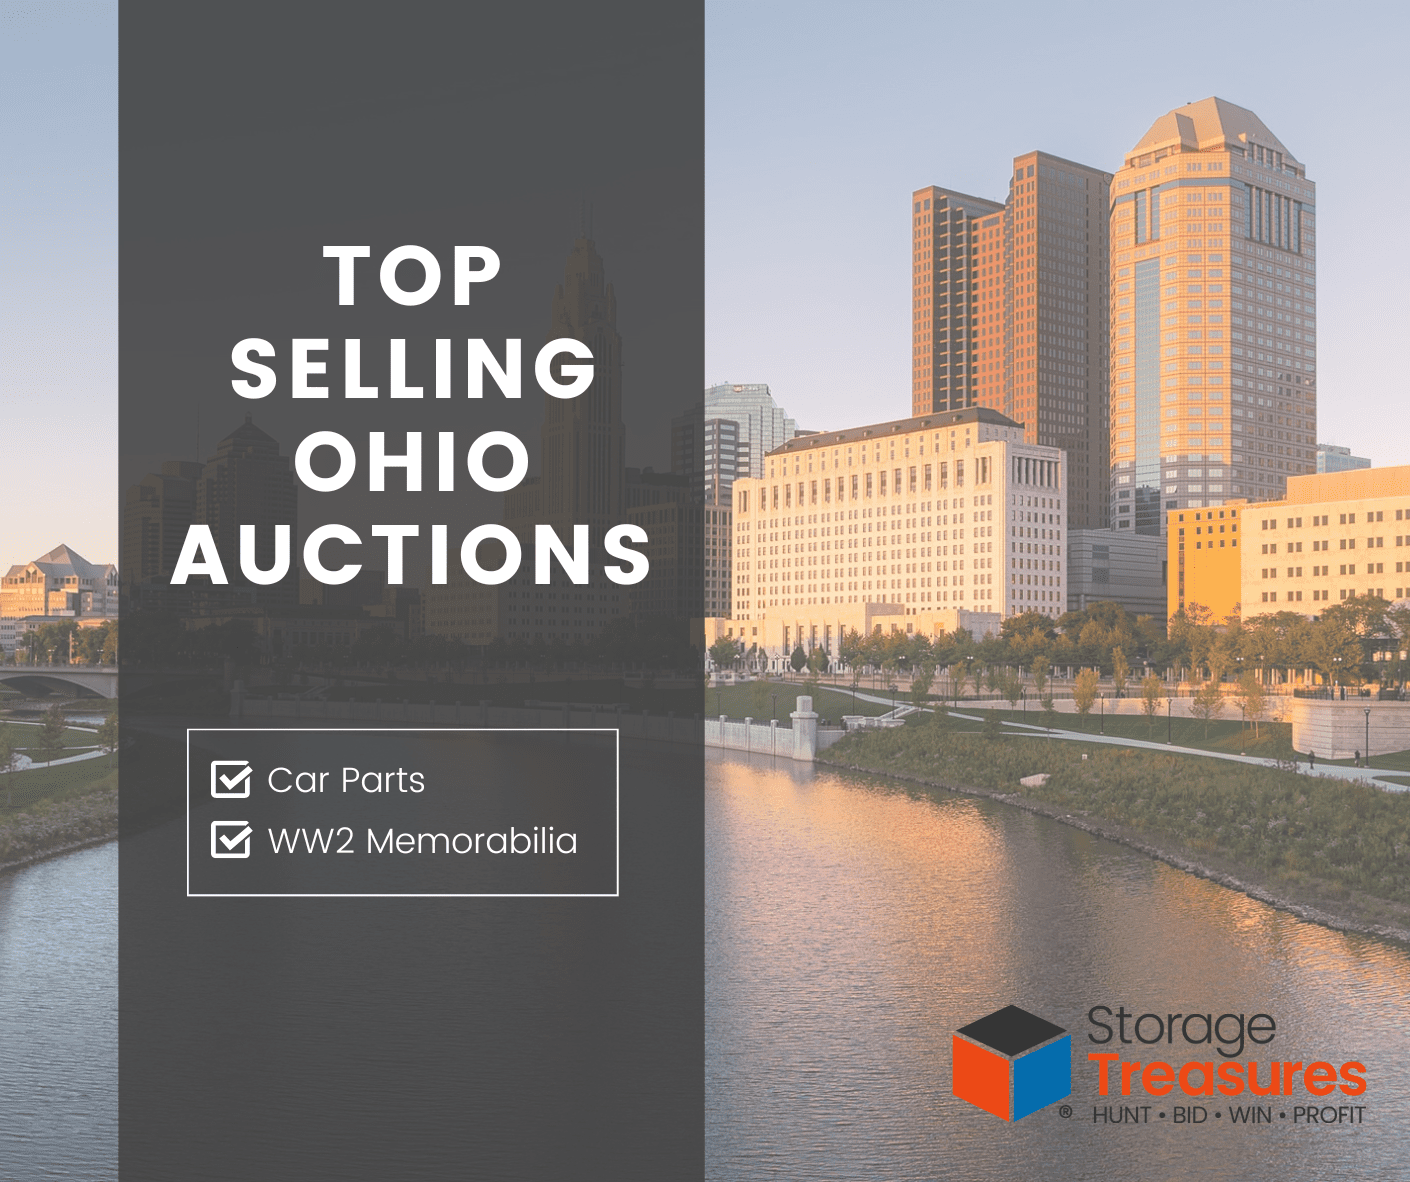 Our top selling storage auction in Ohio